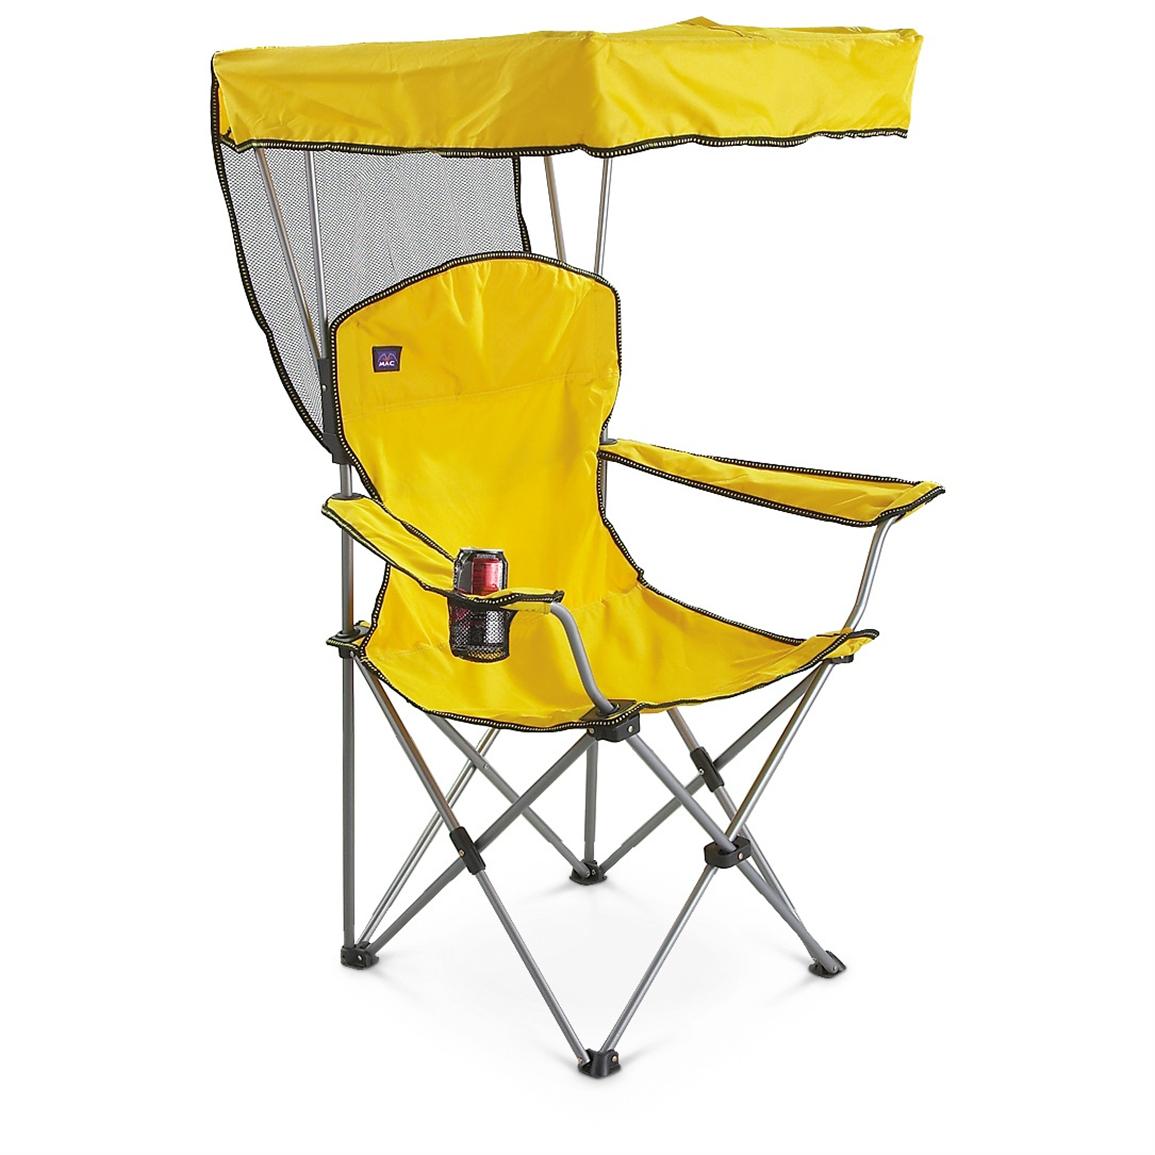 Mac Sports Canopy Chair 205419 Chairs At Sportsman S Guide